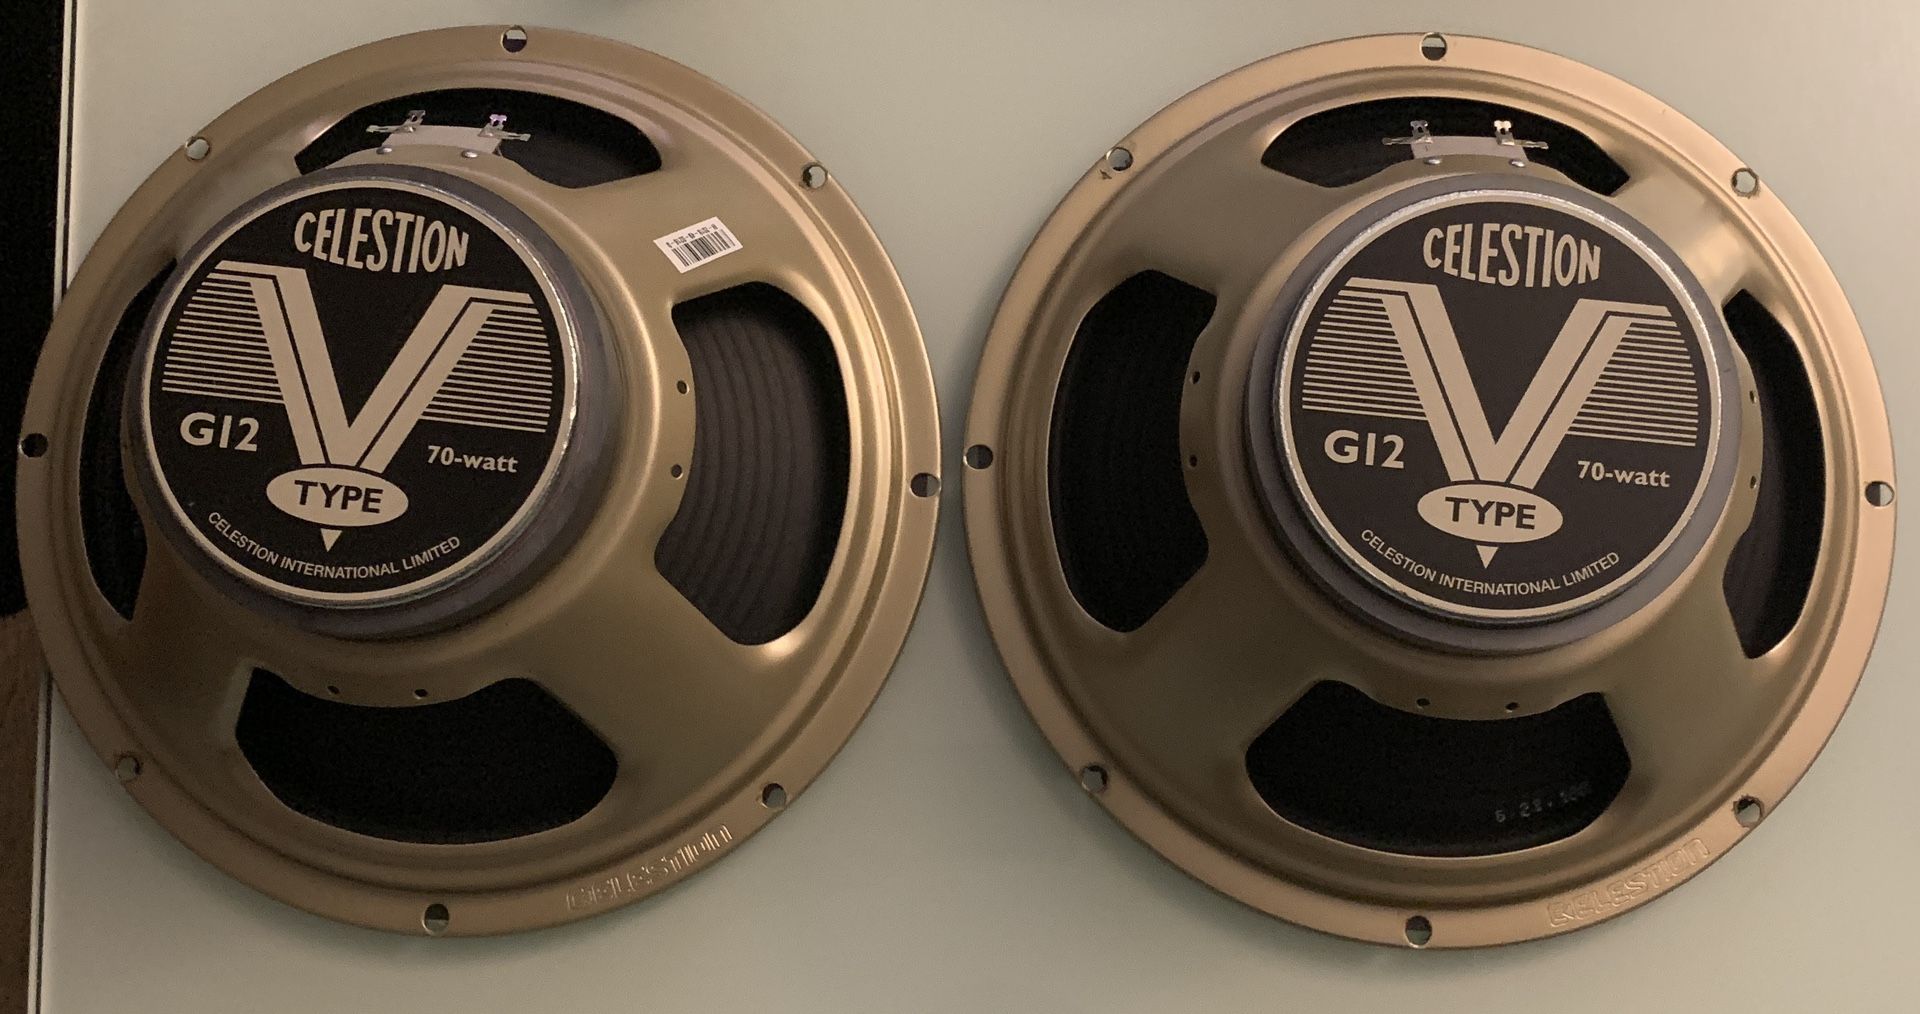 New 4 Celestion G12 Replacement Speakers.